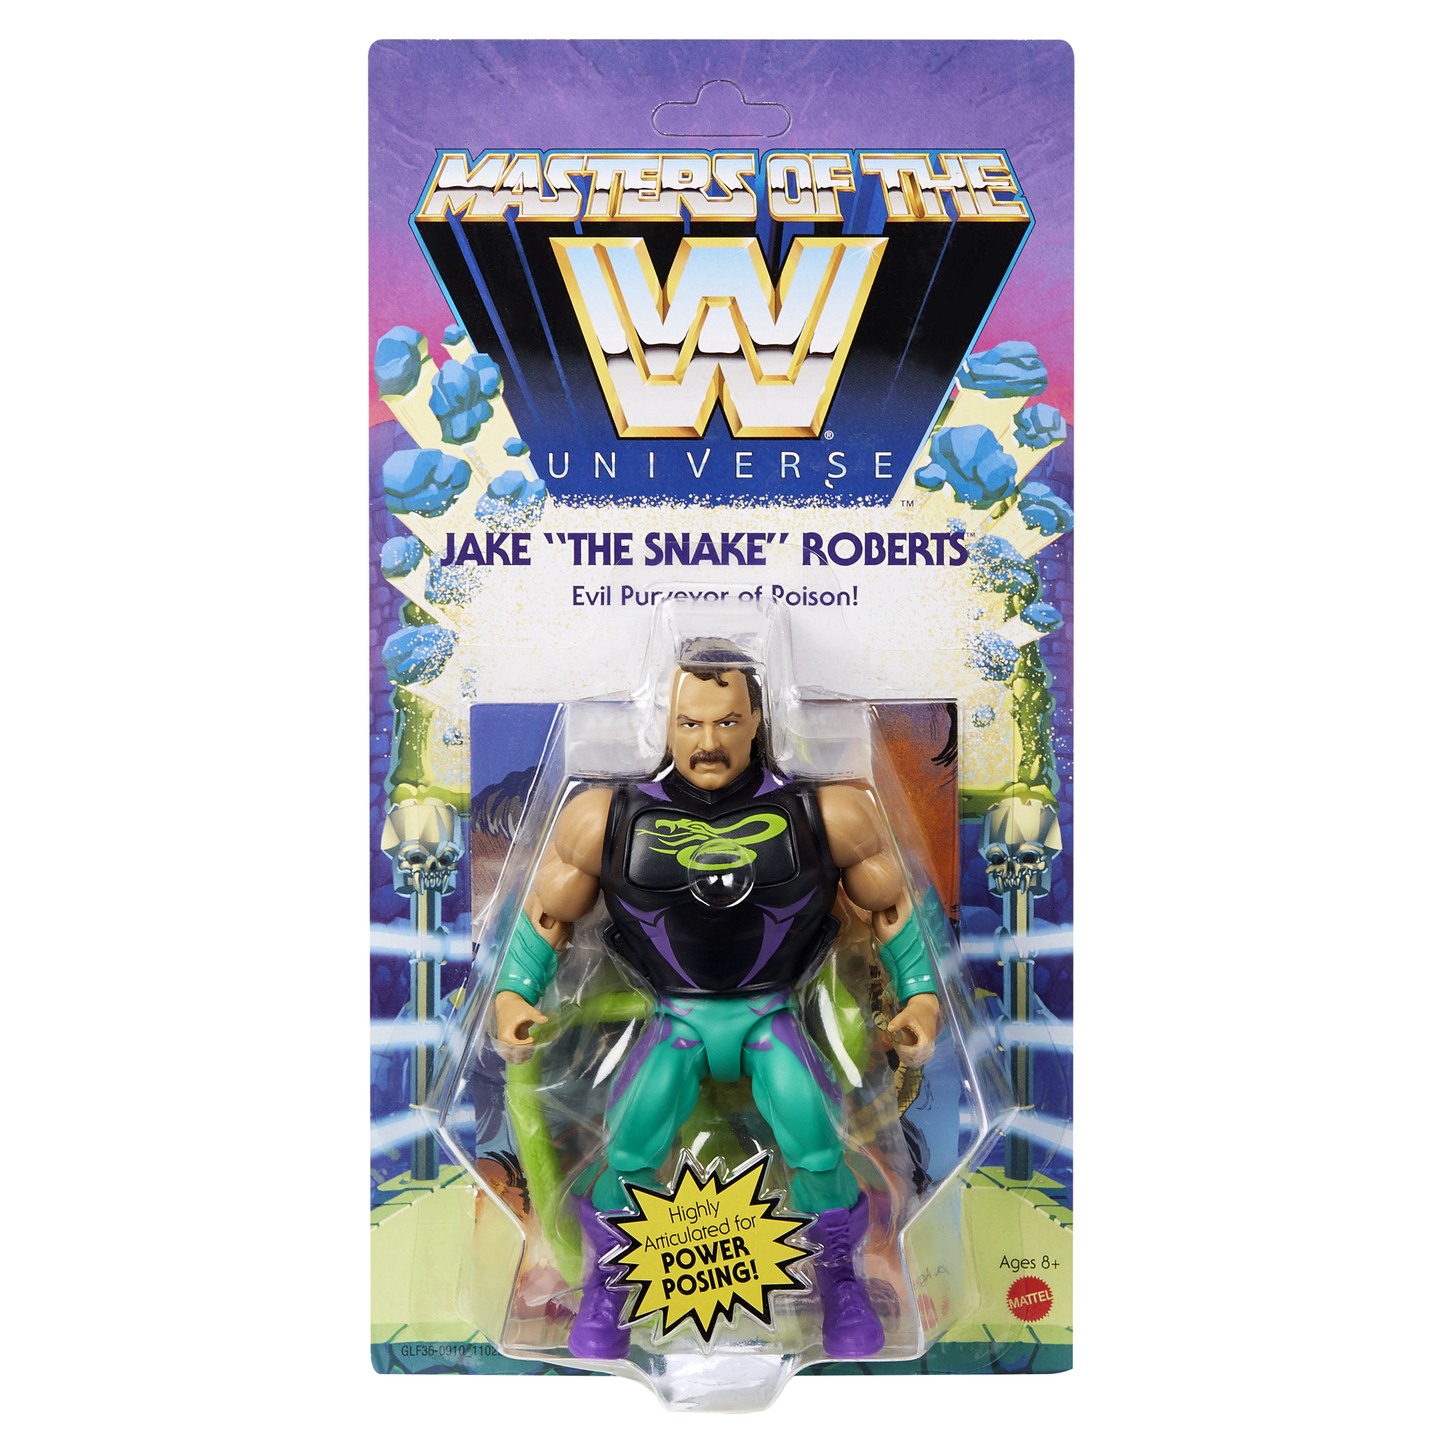 WWE Mattel Masters of the WWE Universe 4 Jake "The Snake" Roberts [Exclusive]